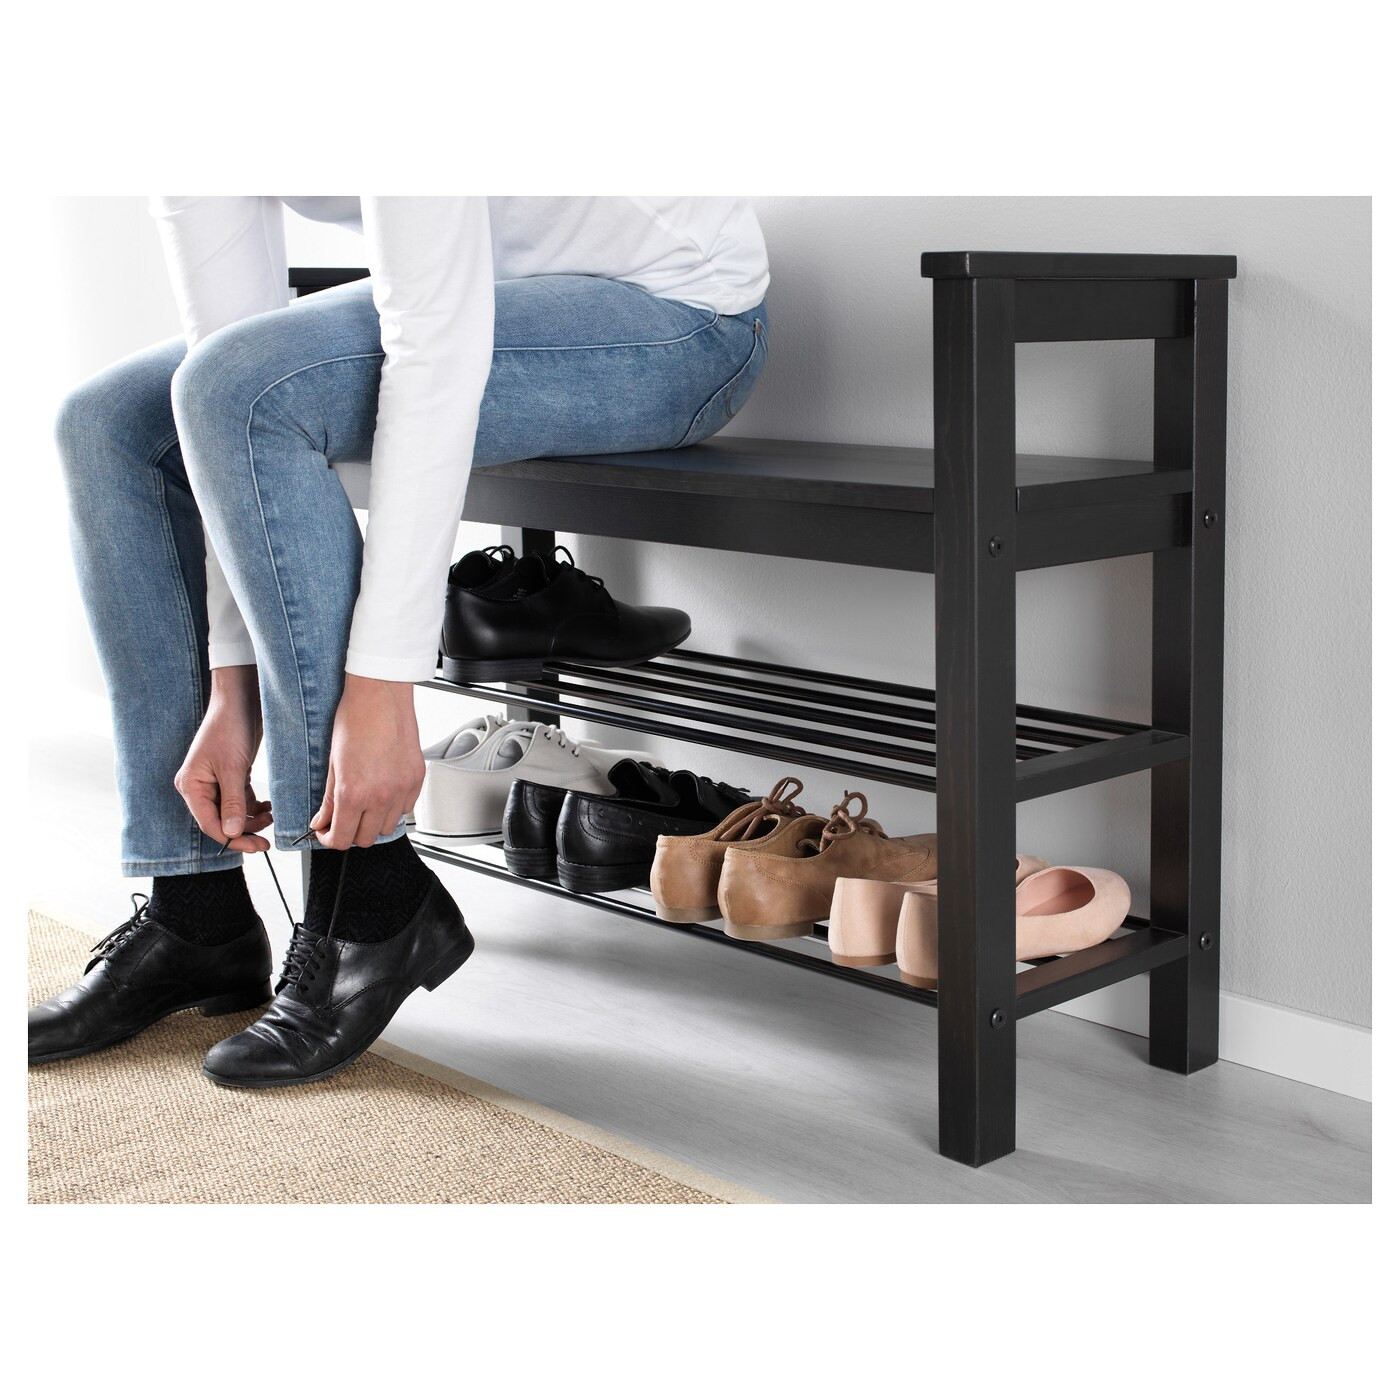 Hemnes Bench With Shoe Storage
 Shoe Stand With Bench